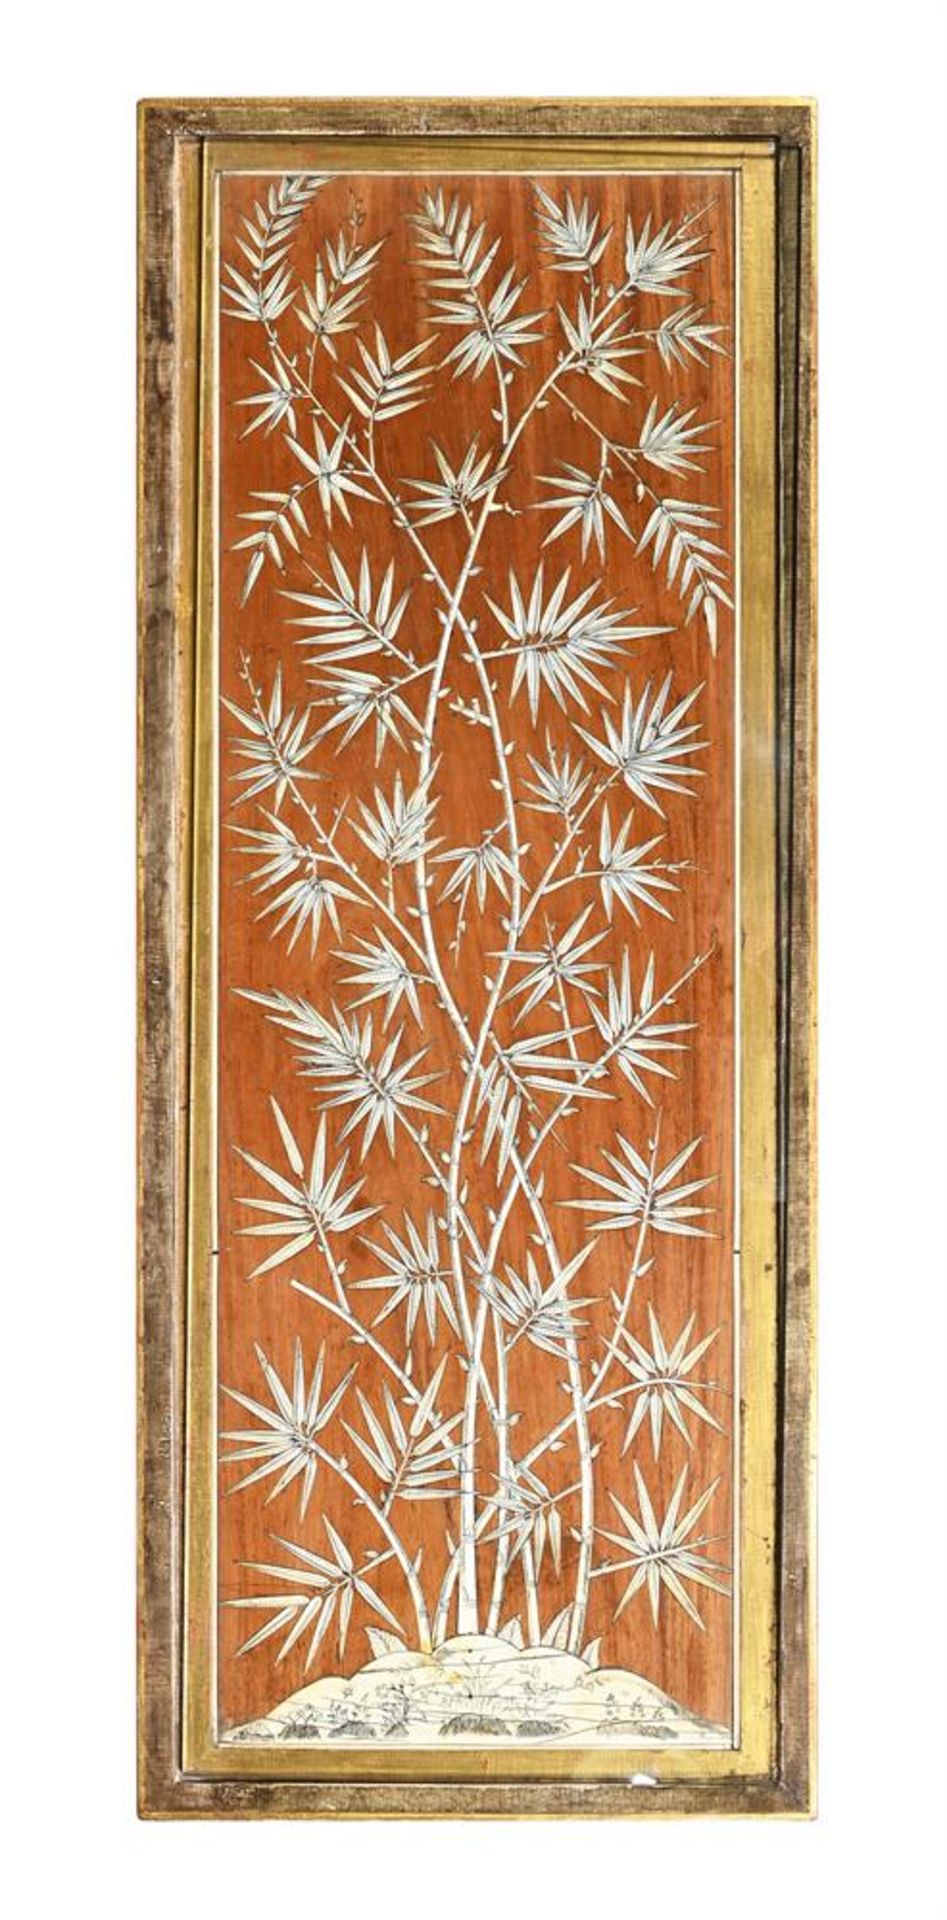 Y AN ANGLO-INDIAN ENGRAVED IVORY AND INDIAN ROSEWOOD PANEL, THE PANEL VIZAGAPATAM, CIRCA 1760 - Image 3 of 4